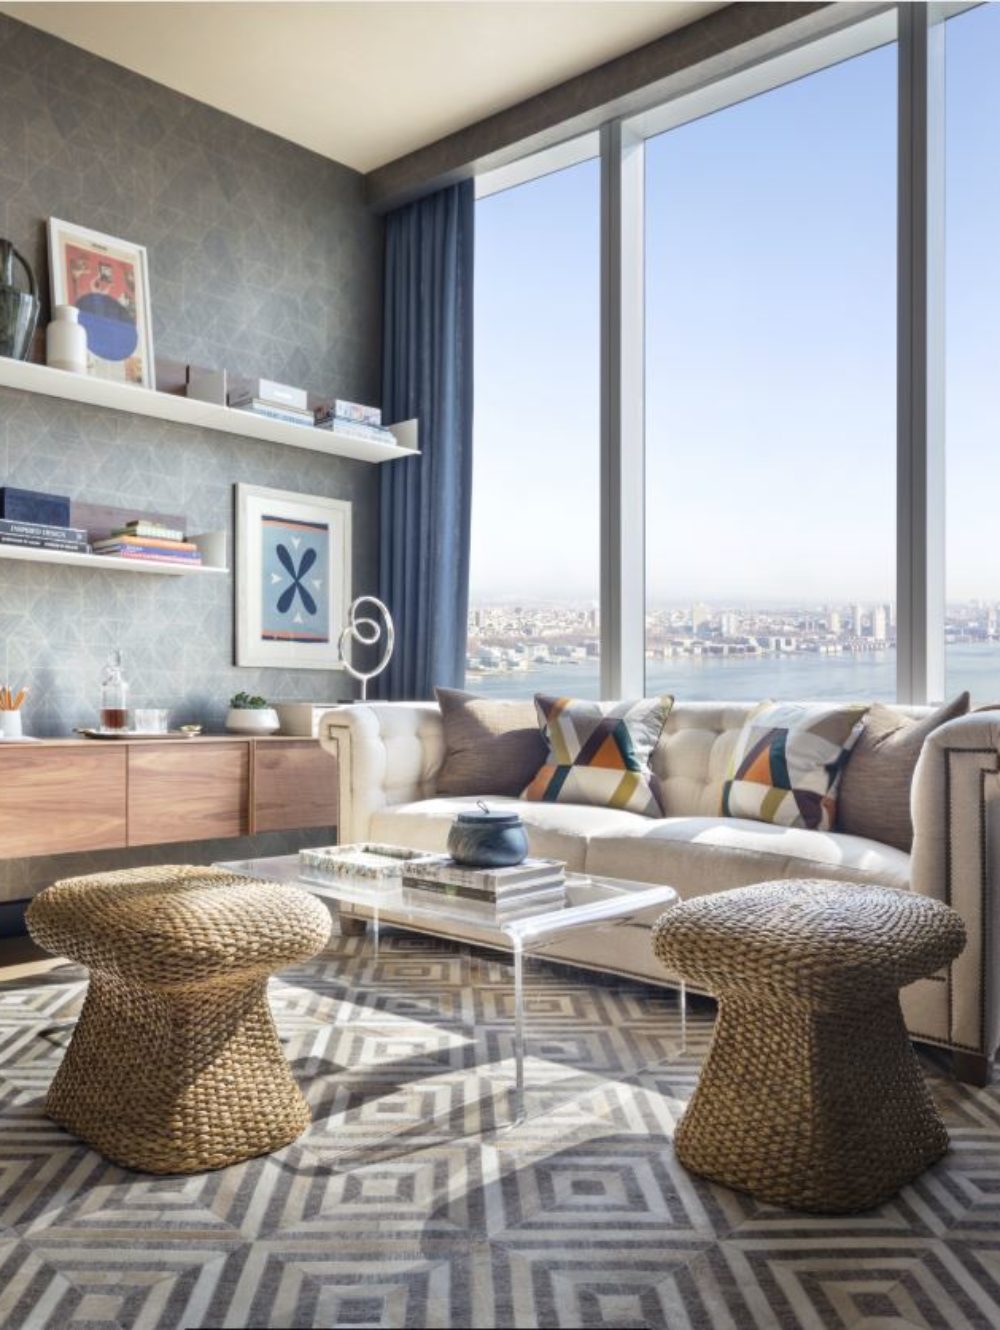 View of 15 Hudson Yards residence study room with window view of New York City. Includes a desk and couches to sit.